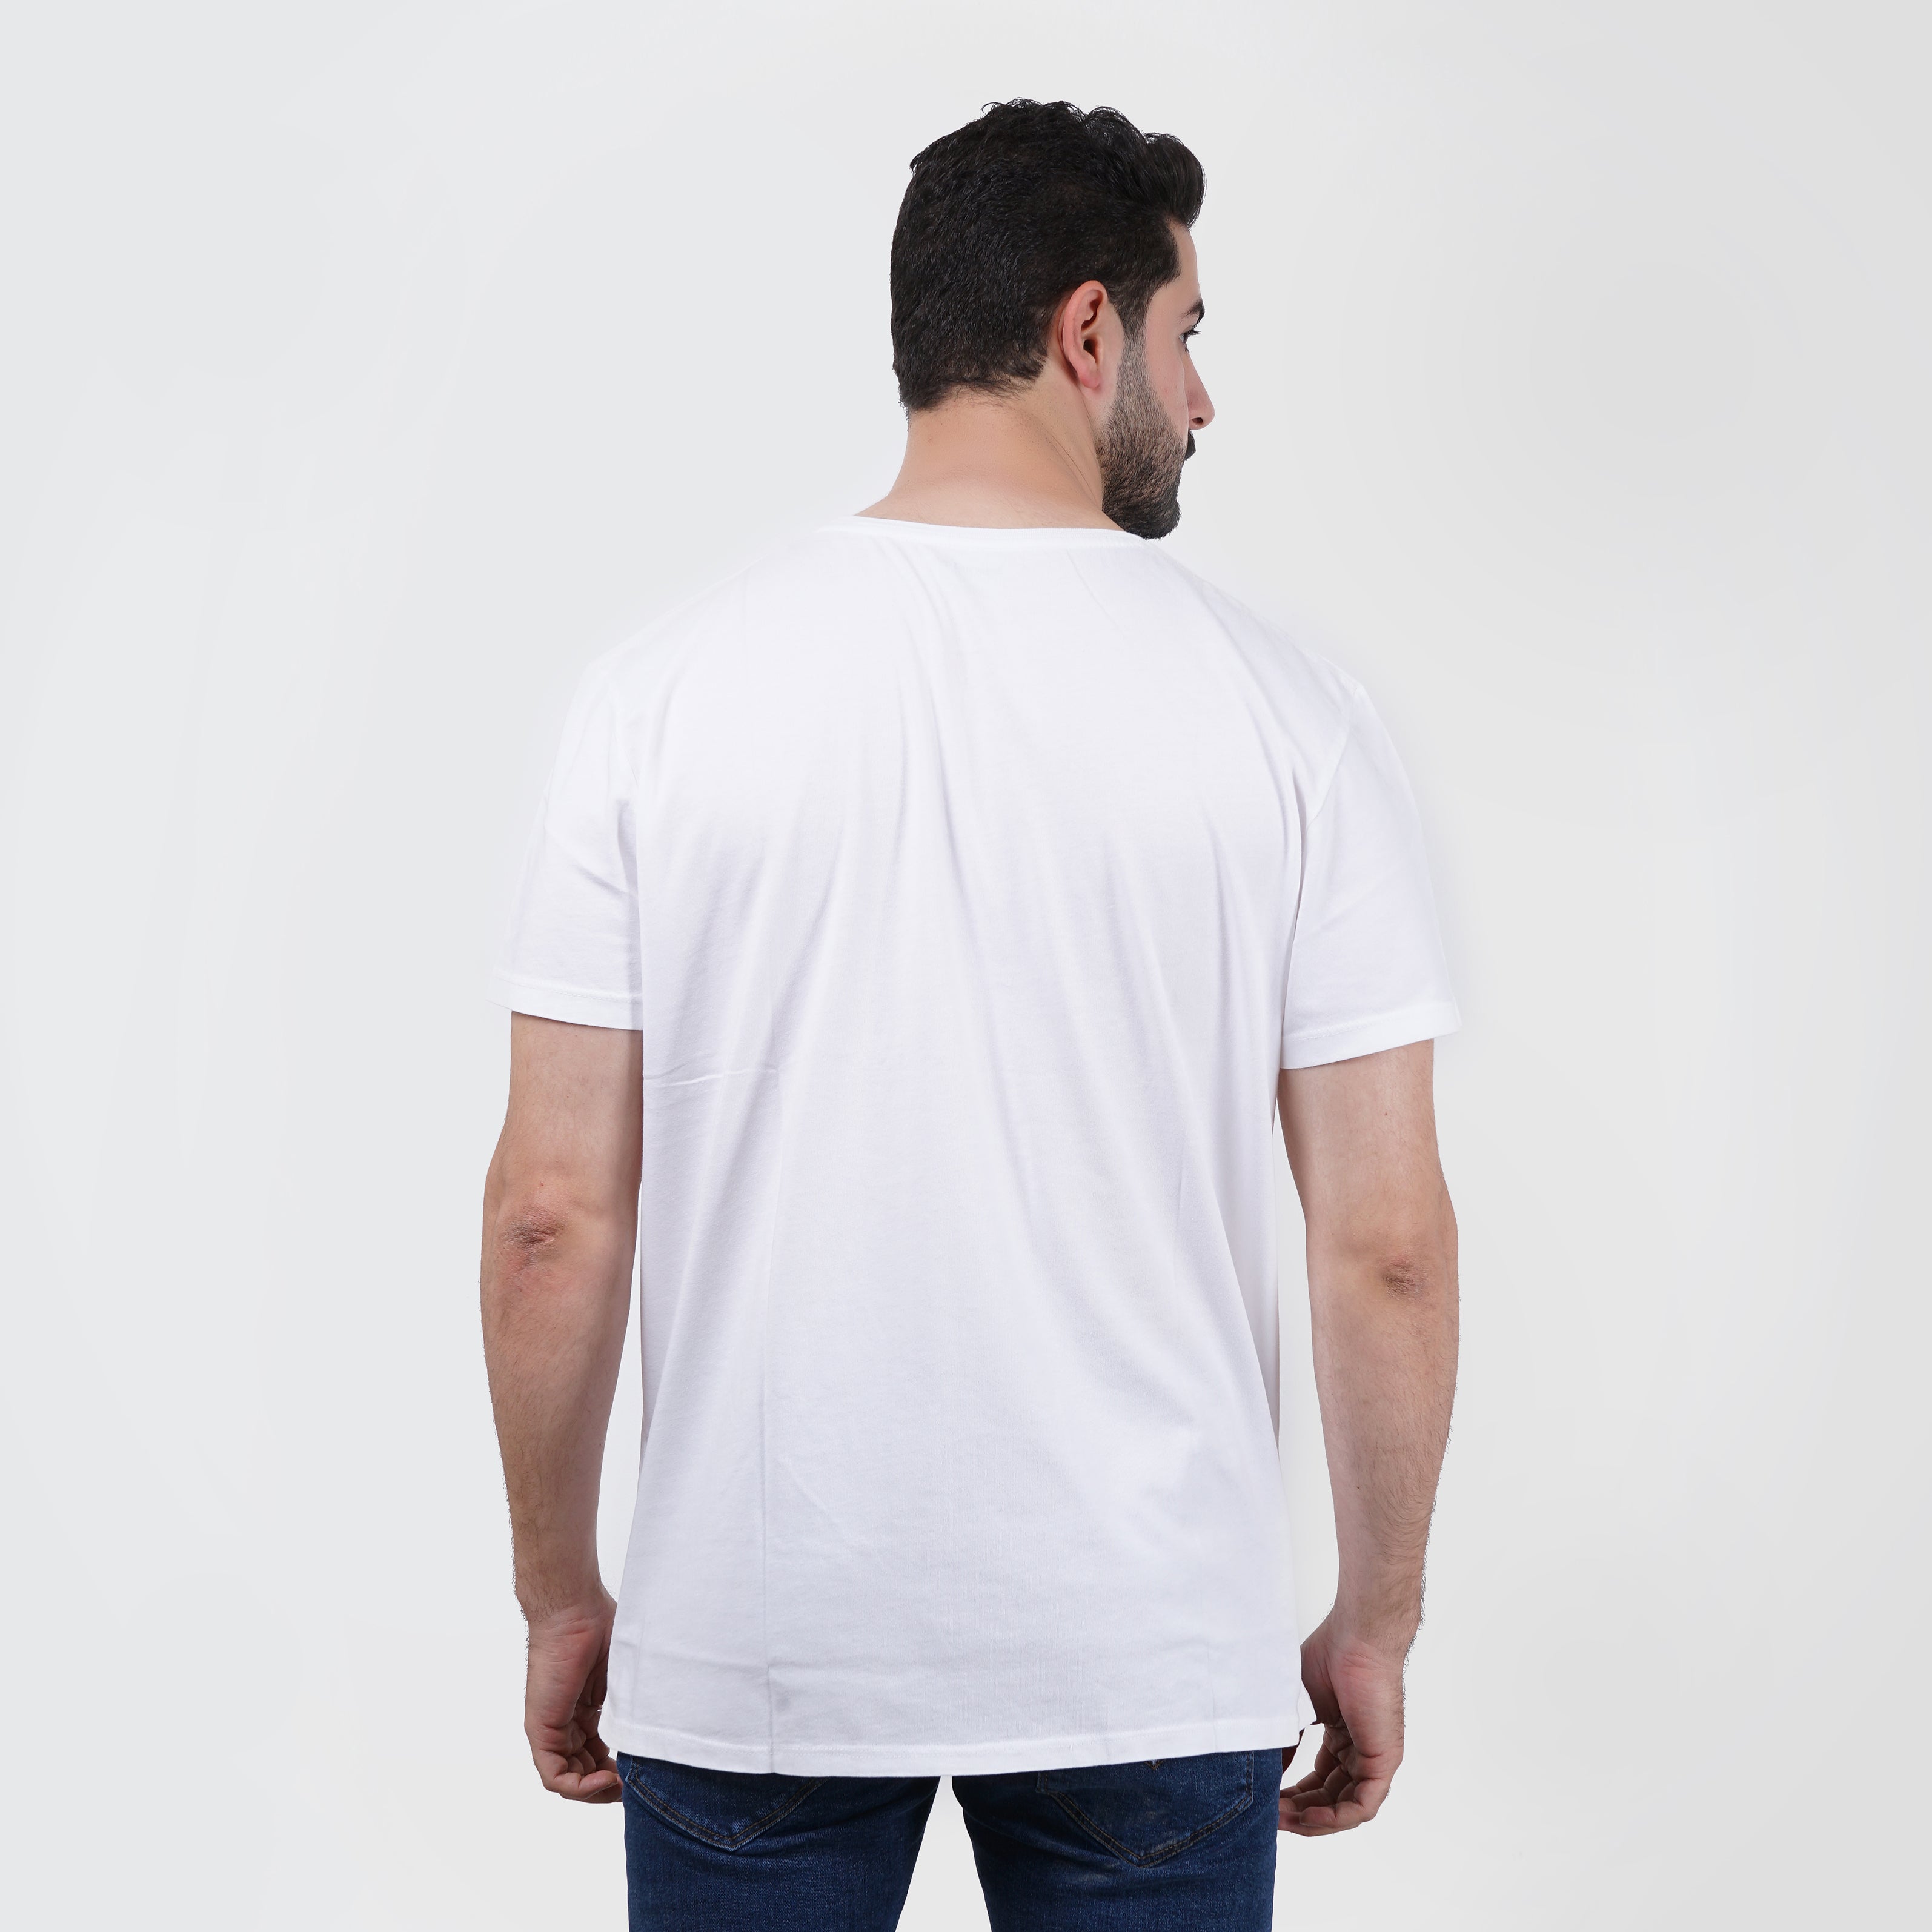 Man in white Timberland t-shirt rear view on white background, plain design, casual style.